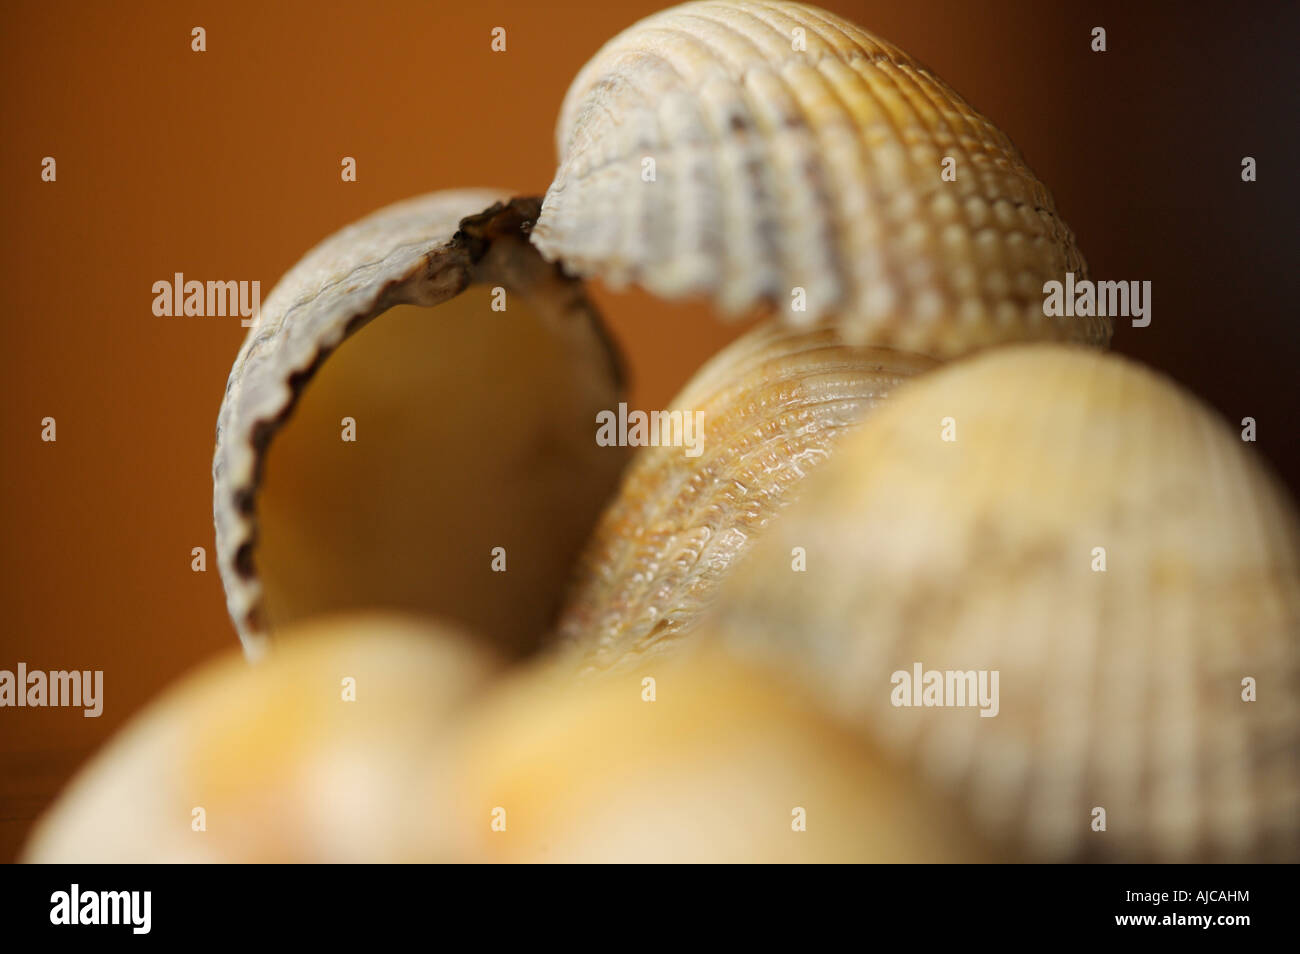 Sea shells with a shallow depth of field Stock Photo